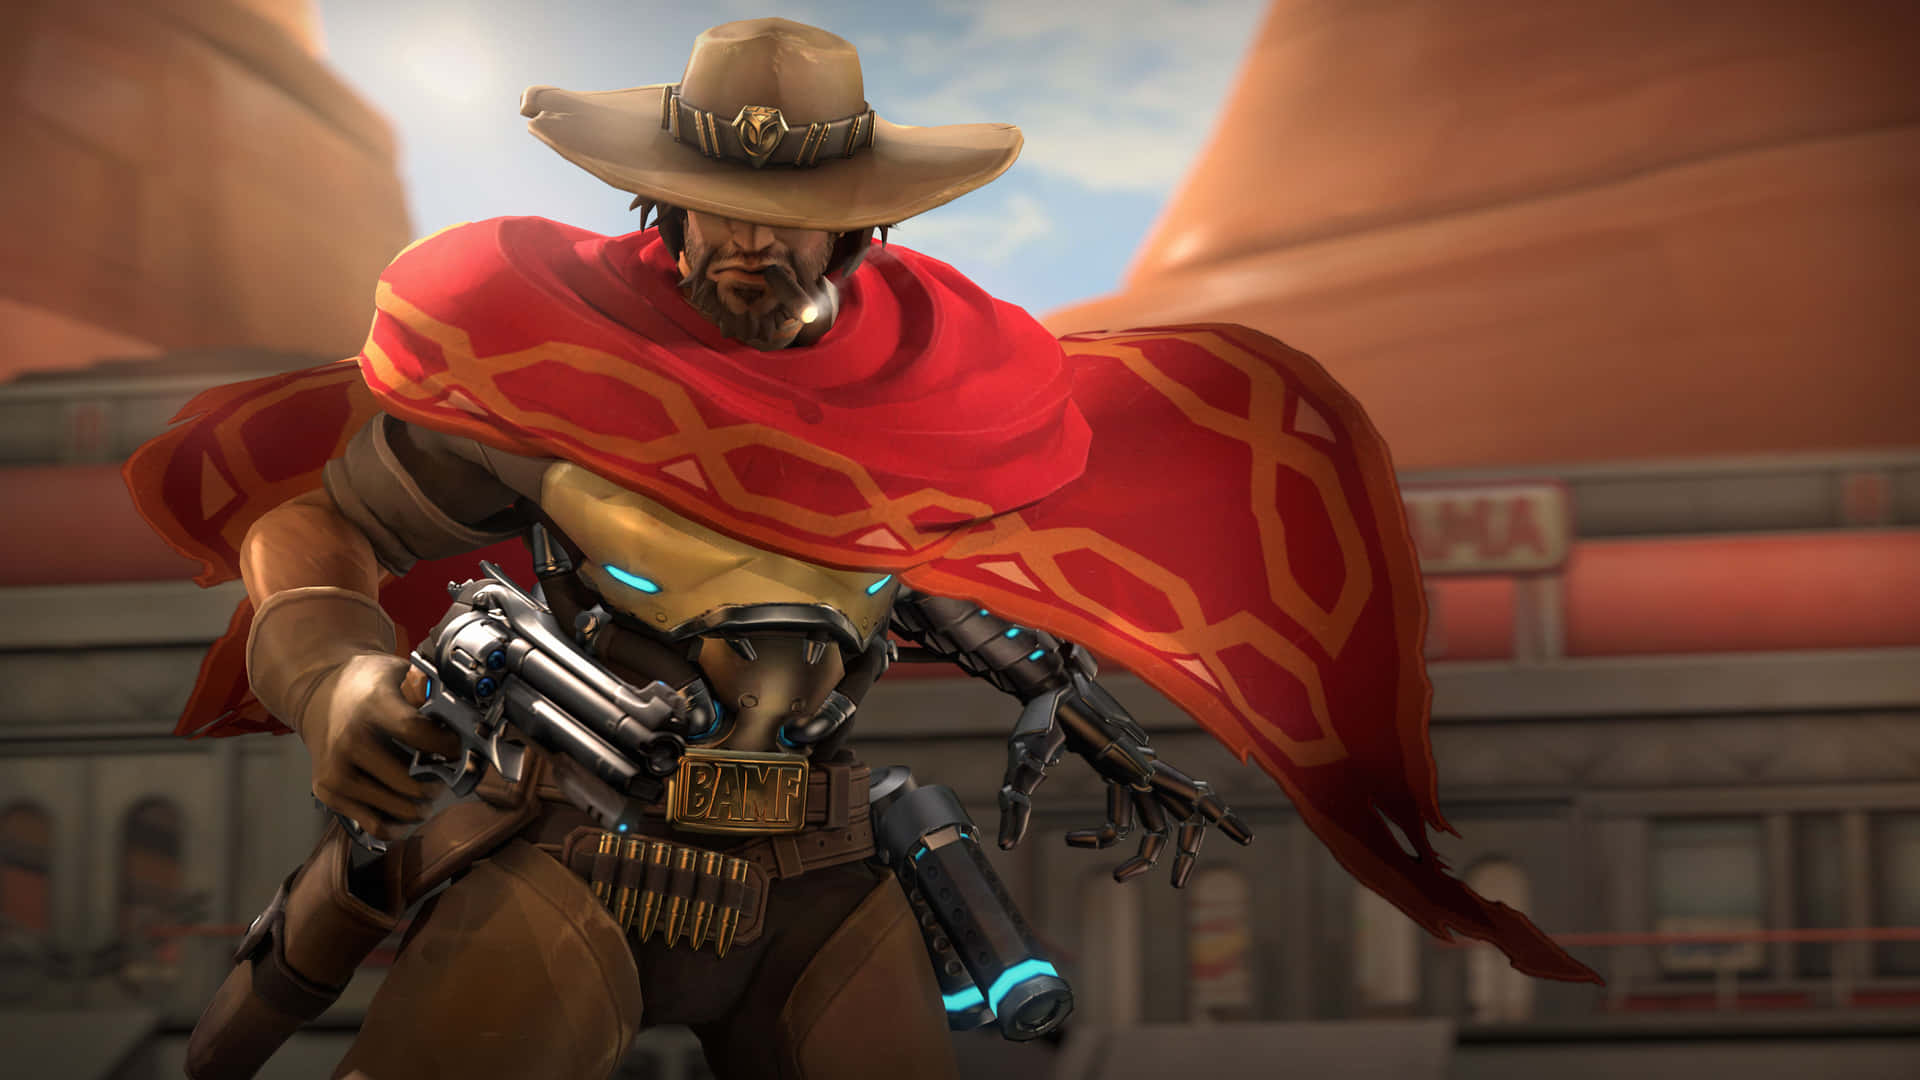 Mccree in action, ready to take on any battle in Overwatch Wallpaper